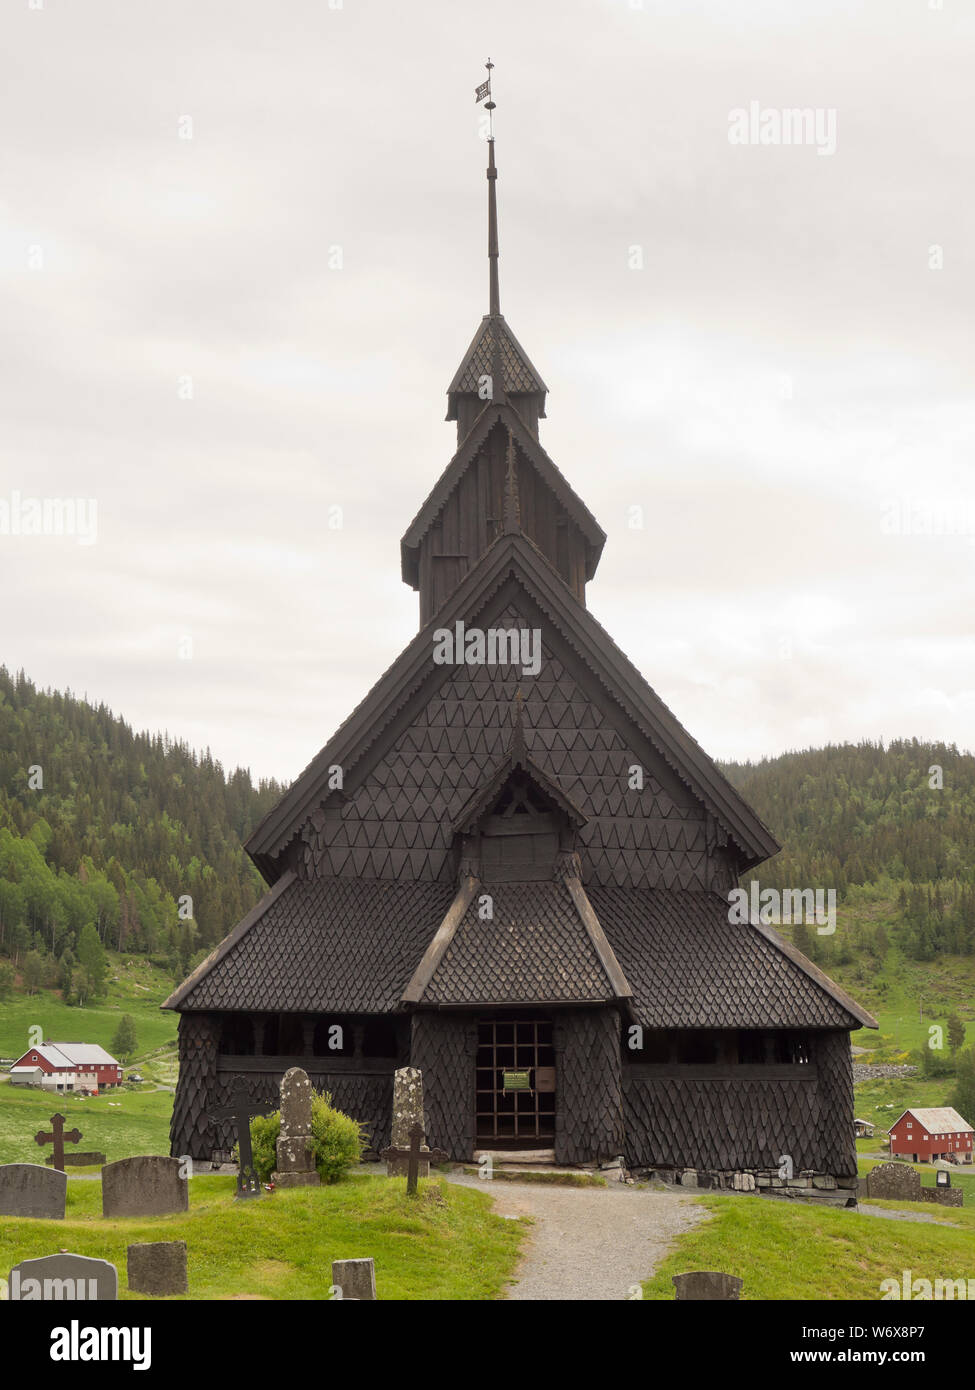 Eidsborg Stave church from the medieval period, a prime example of Norwegian wooden architecture and a tourist attraction surrounded by its cemetery Stock Photo